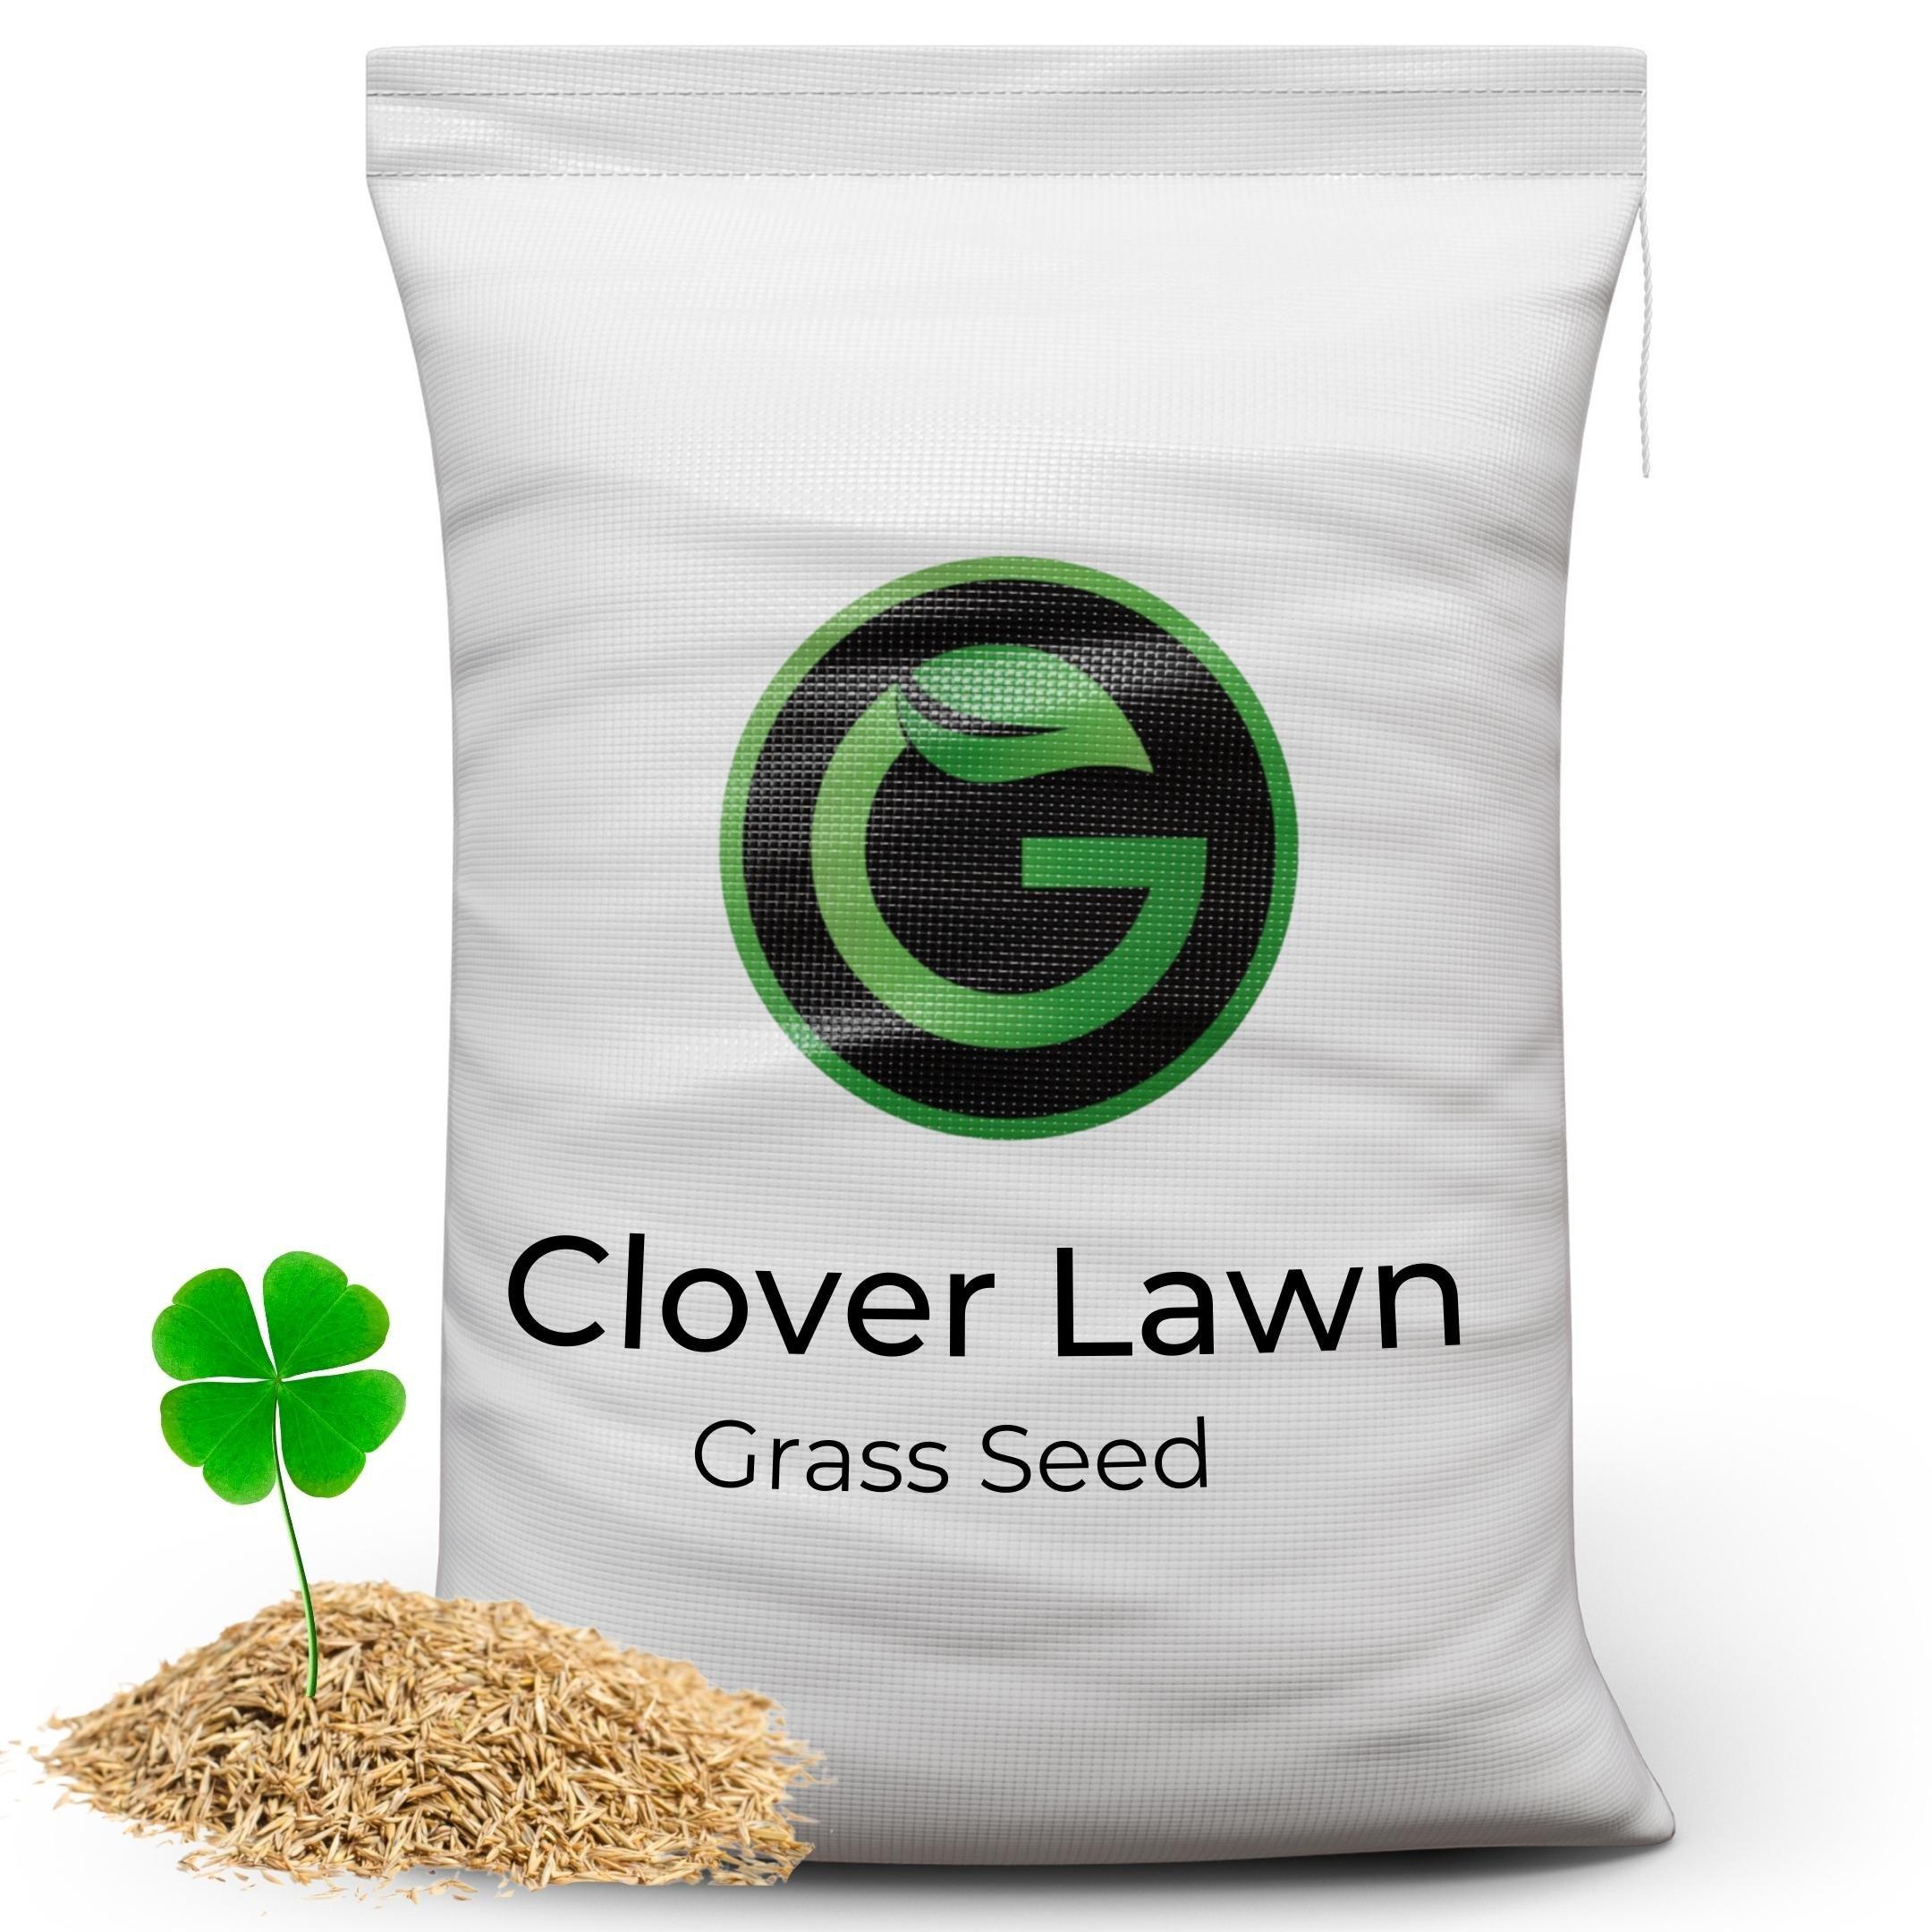 Clover Lawn Seed Grass Seed with White Clover